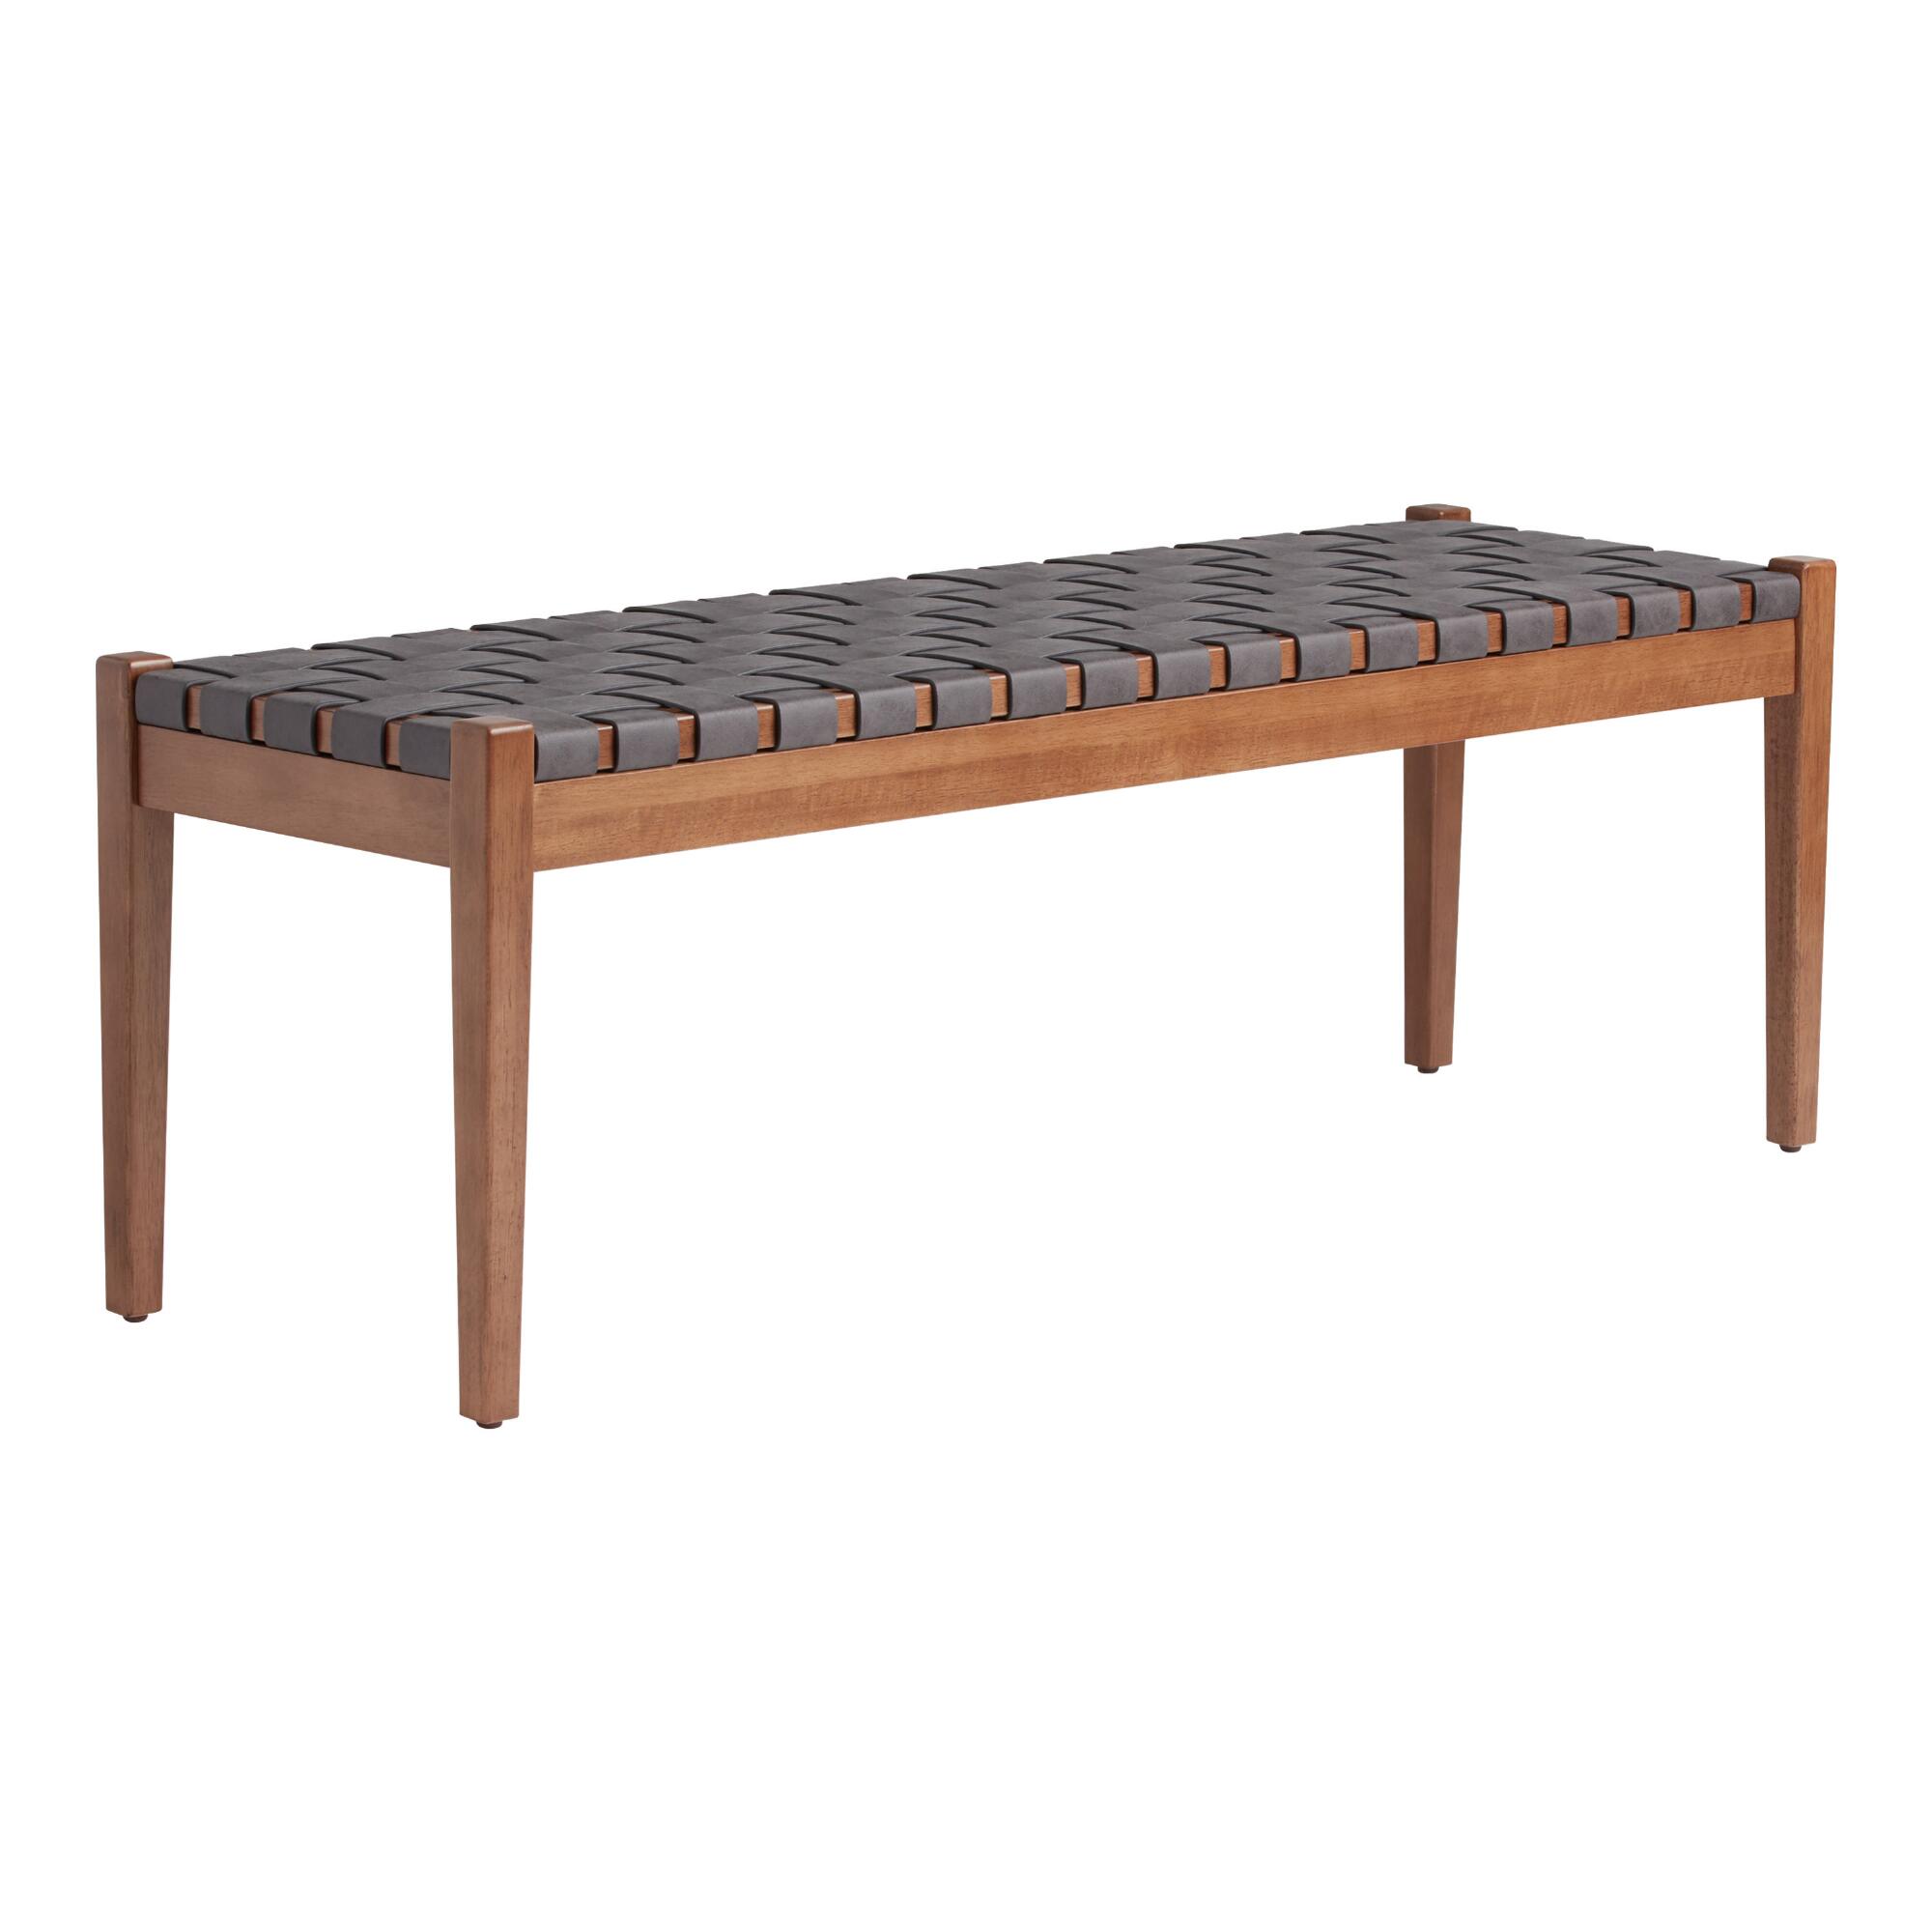 Dark Gray Faux Suede Strap Camden Dining Bench: Brown/Gray/Wood - Faux Leather by World Market